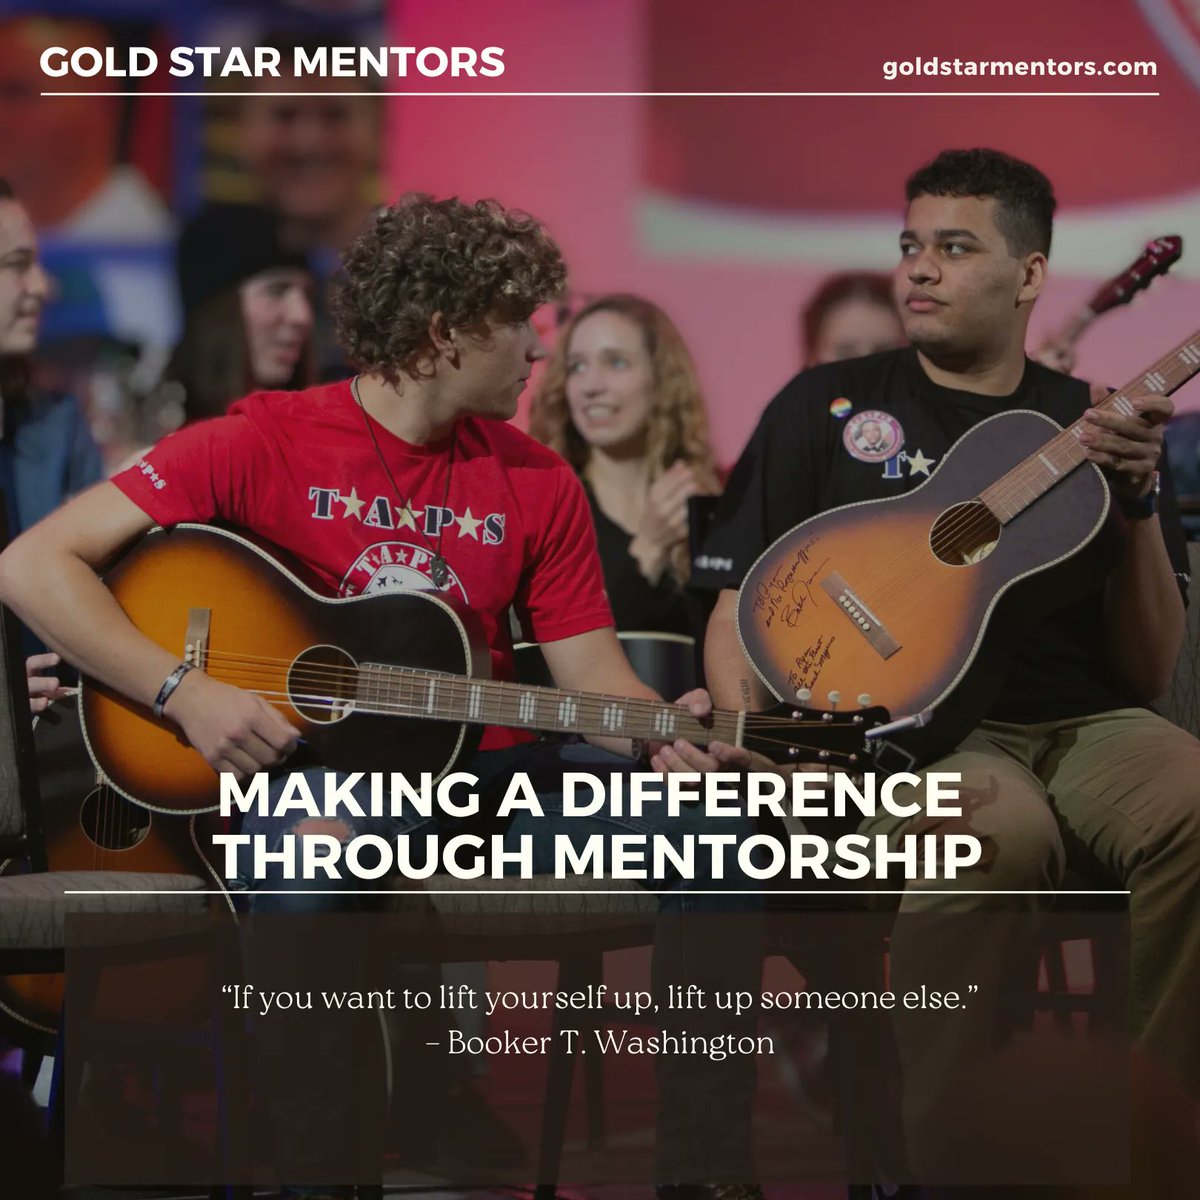 MAKING A DIFFERENCE THROUGH MENTORSHIP.
“If you want to lift yourself up, lift up someone else.” – Booker T. Washington

#goldstarmentors
#goldstarfamilies
#changinglives
#oneguitaratatime
#guitargiveaway